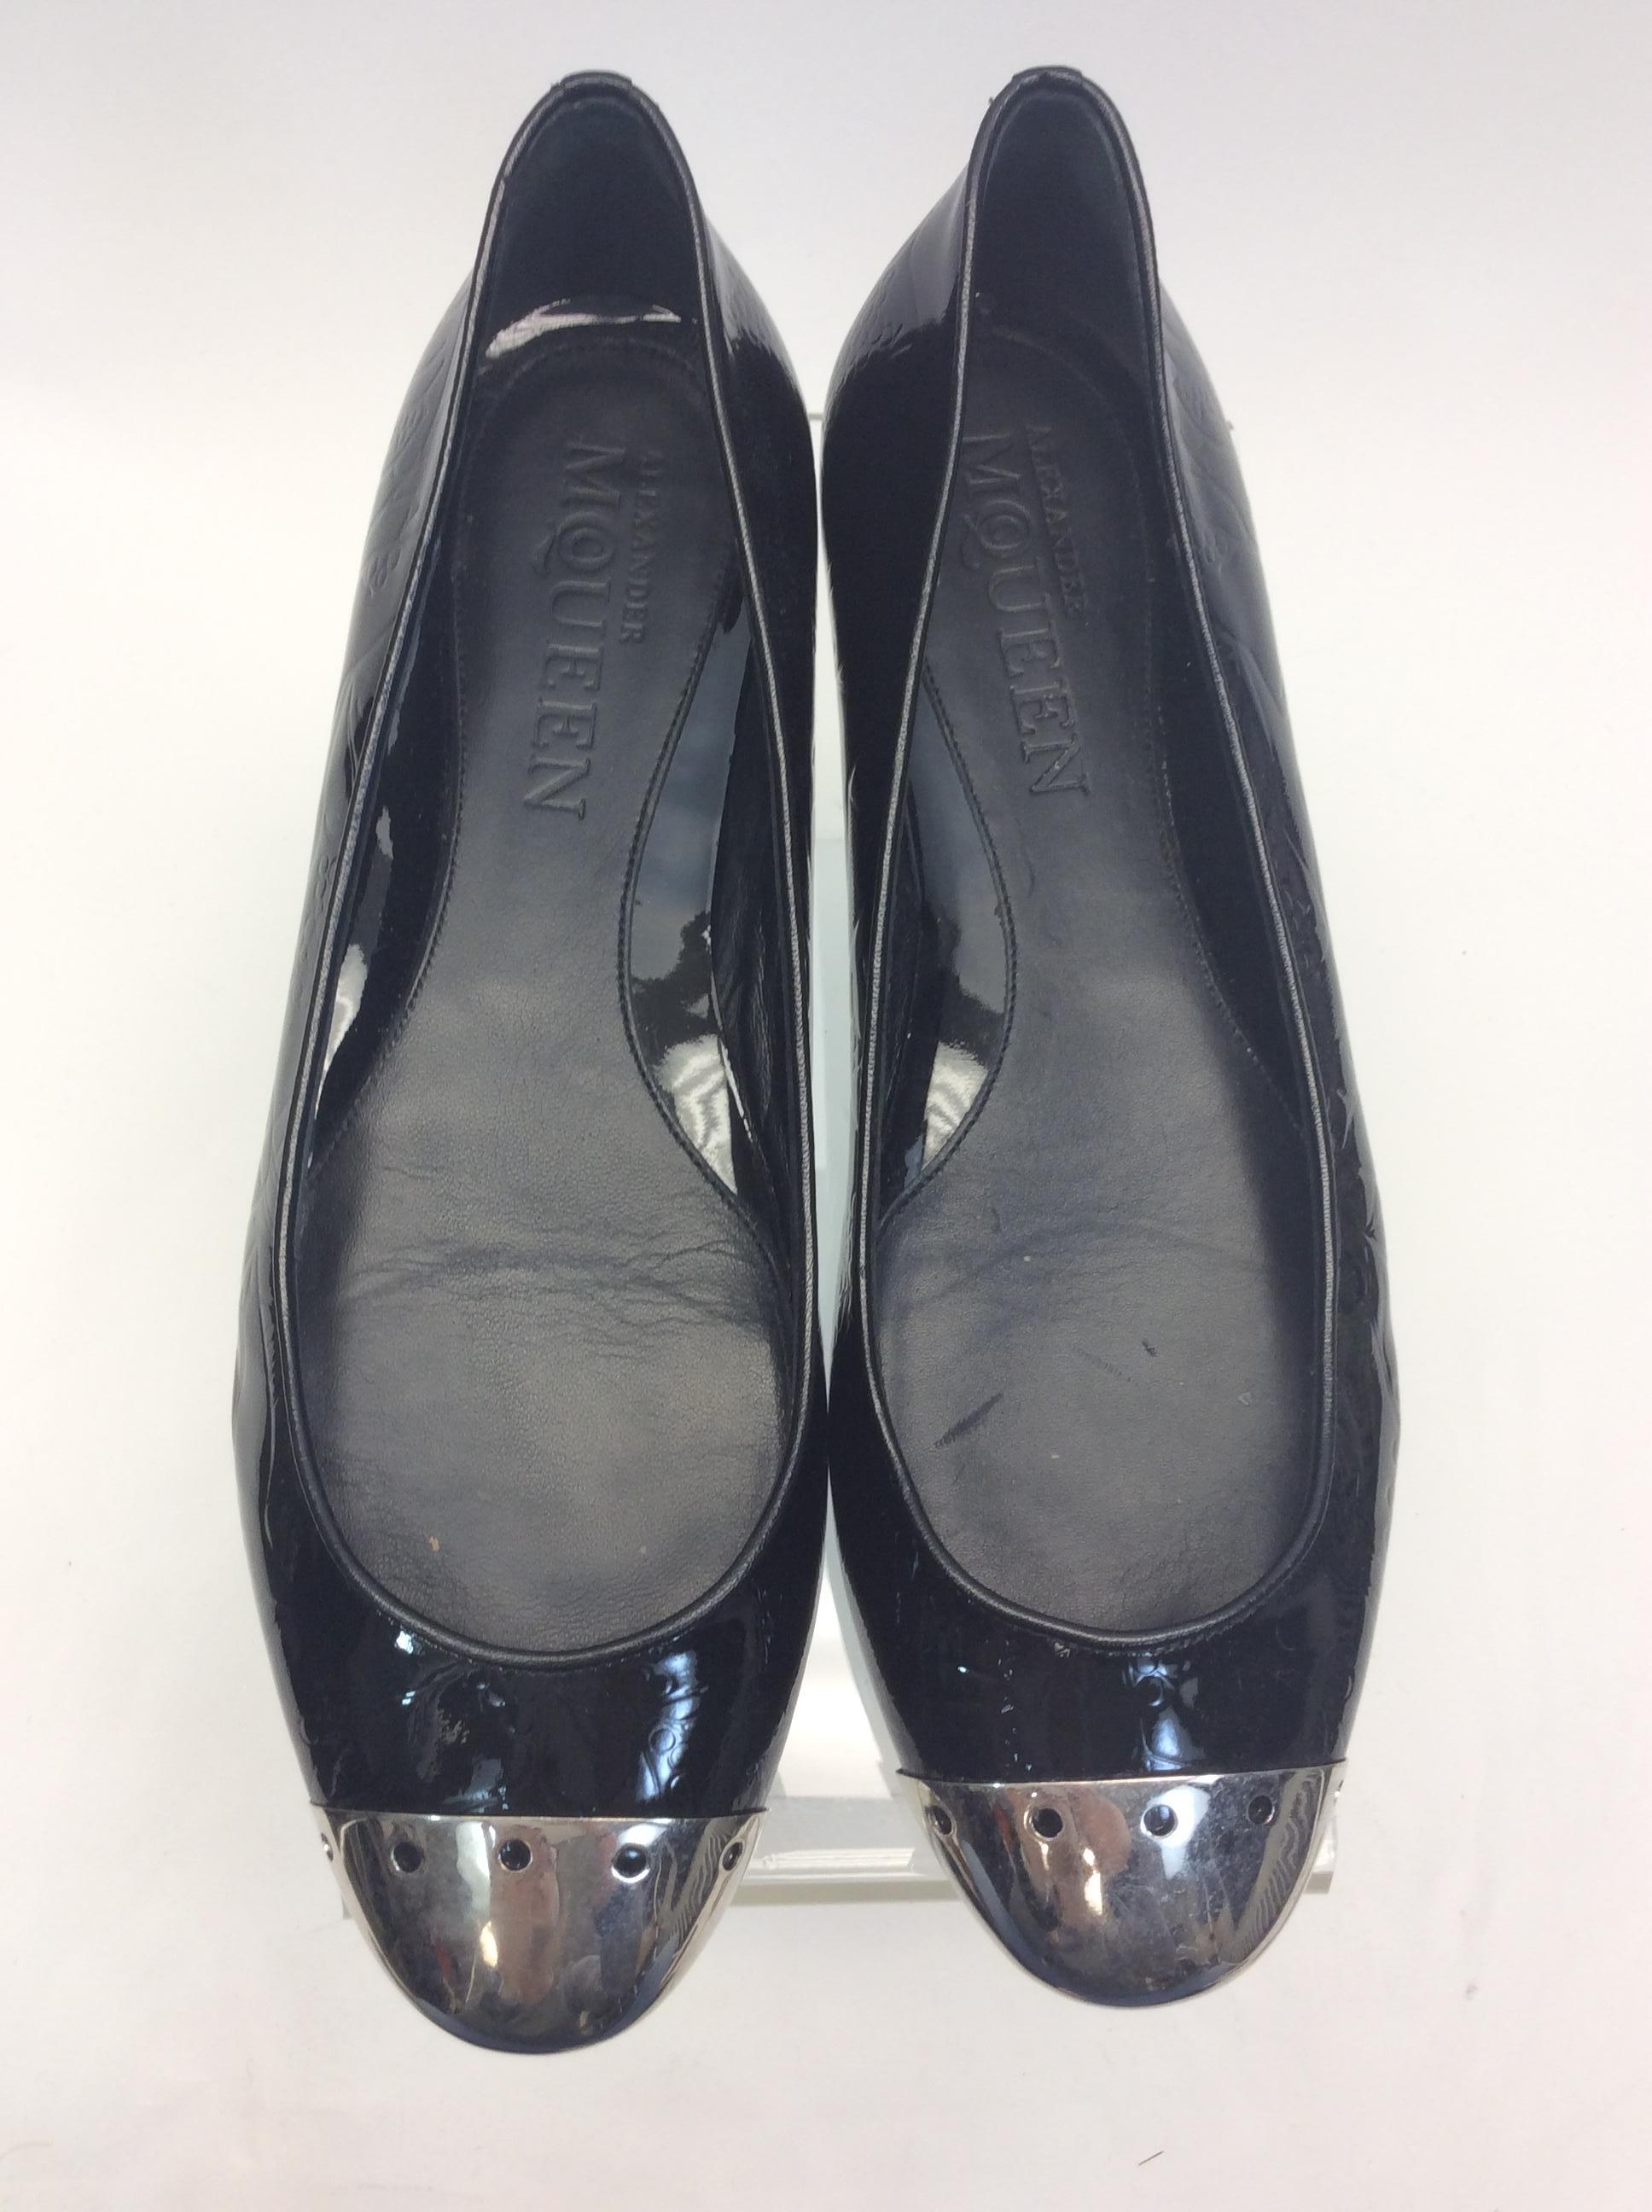 Alexander McQueen Black Patent Leather and Silver Ballet Flats For Sale 1